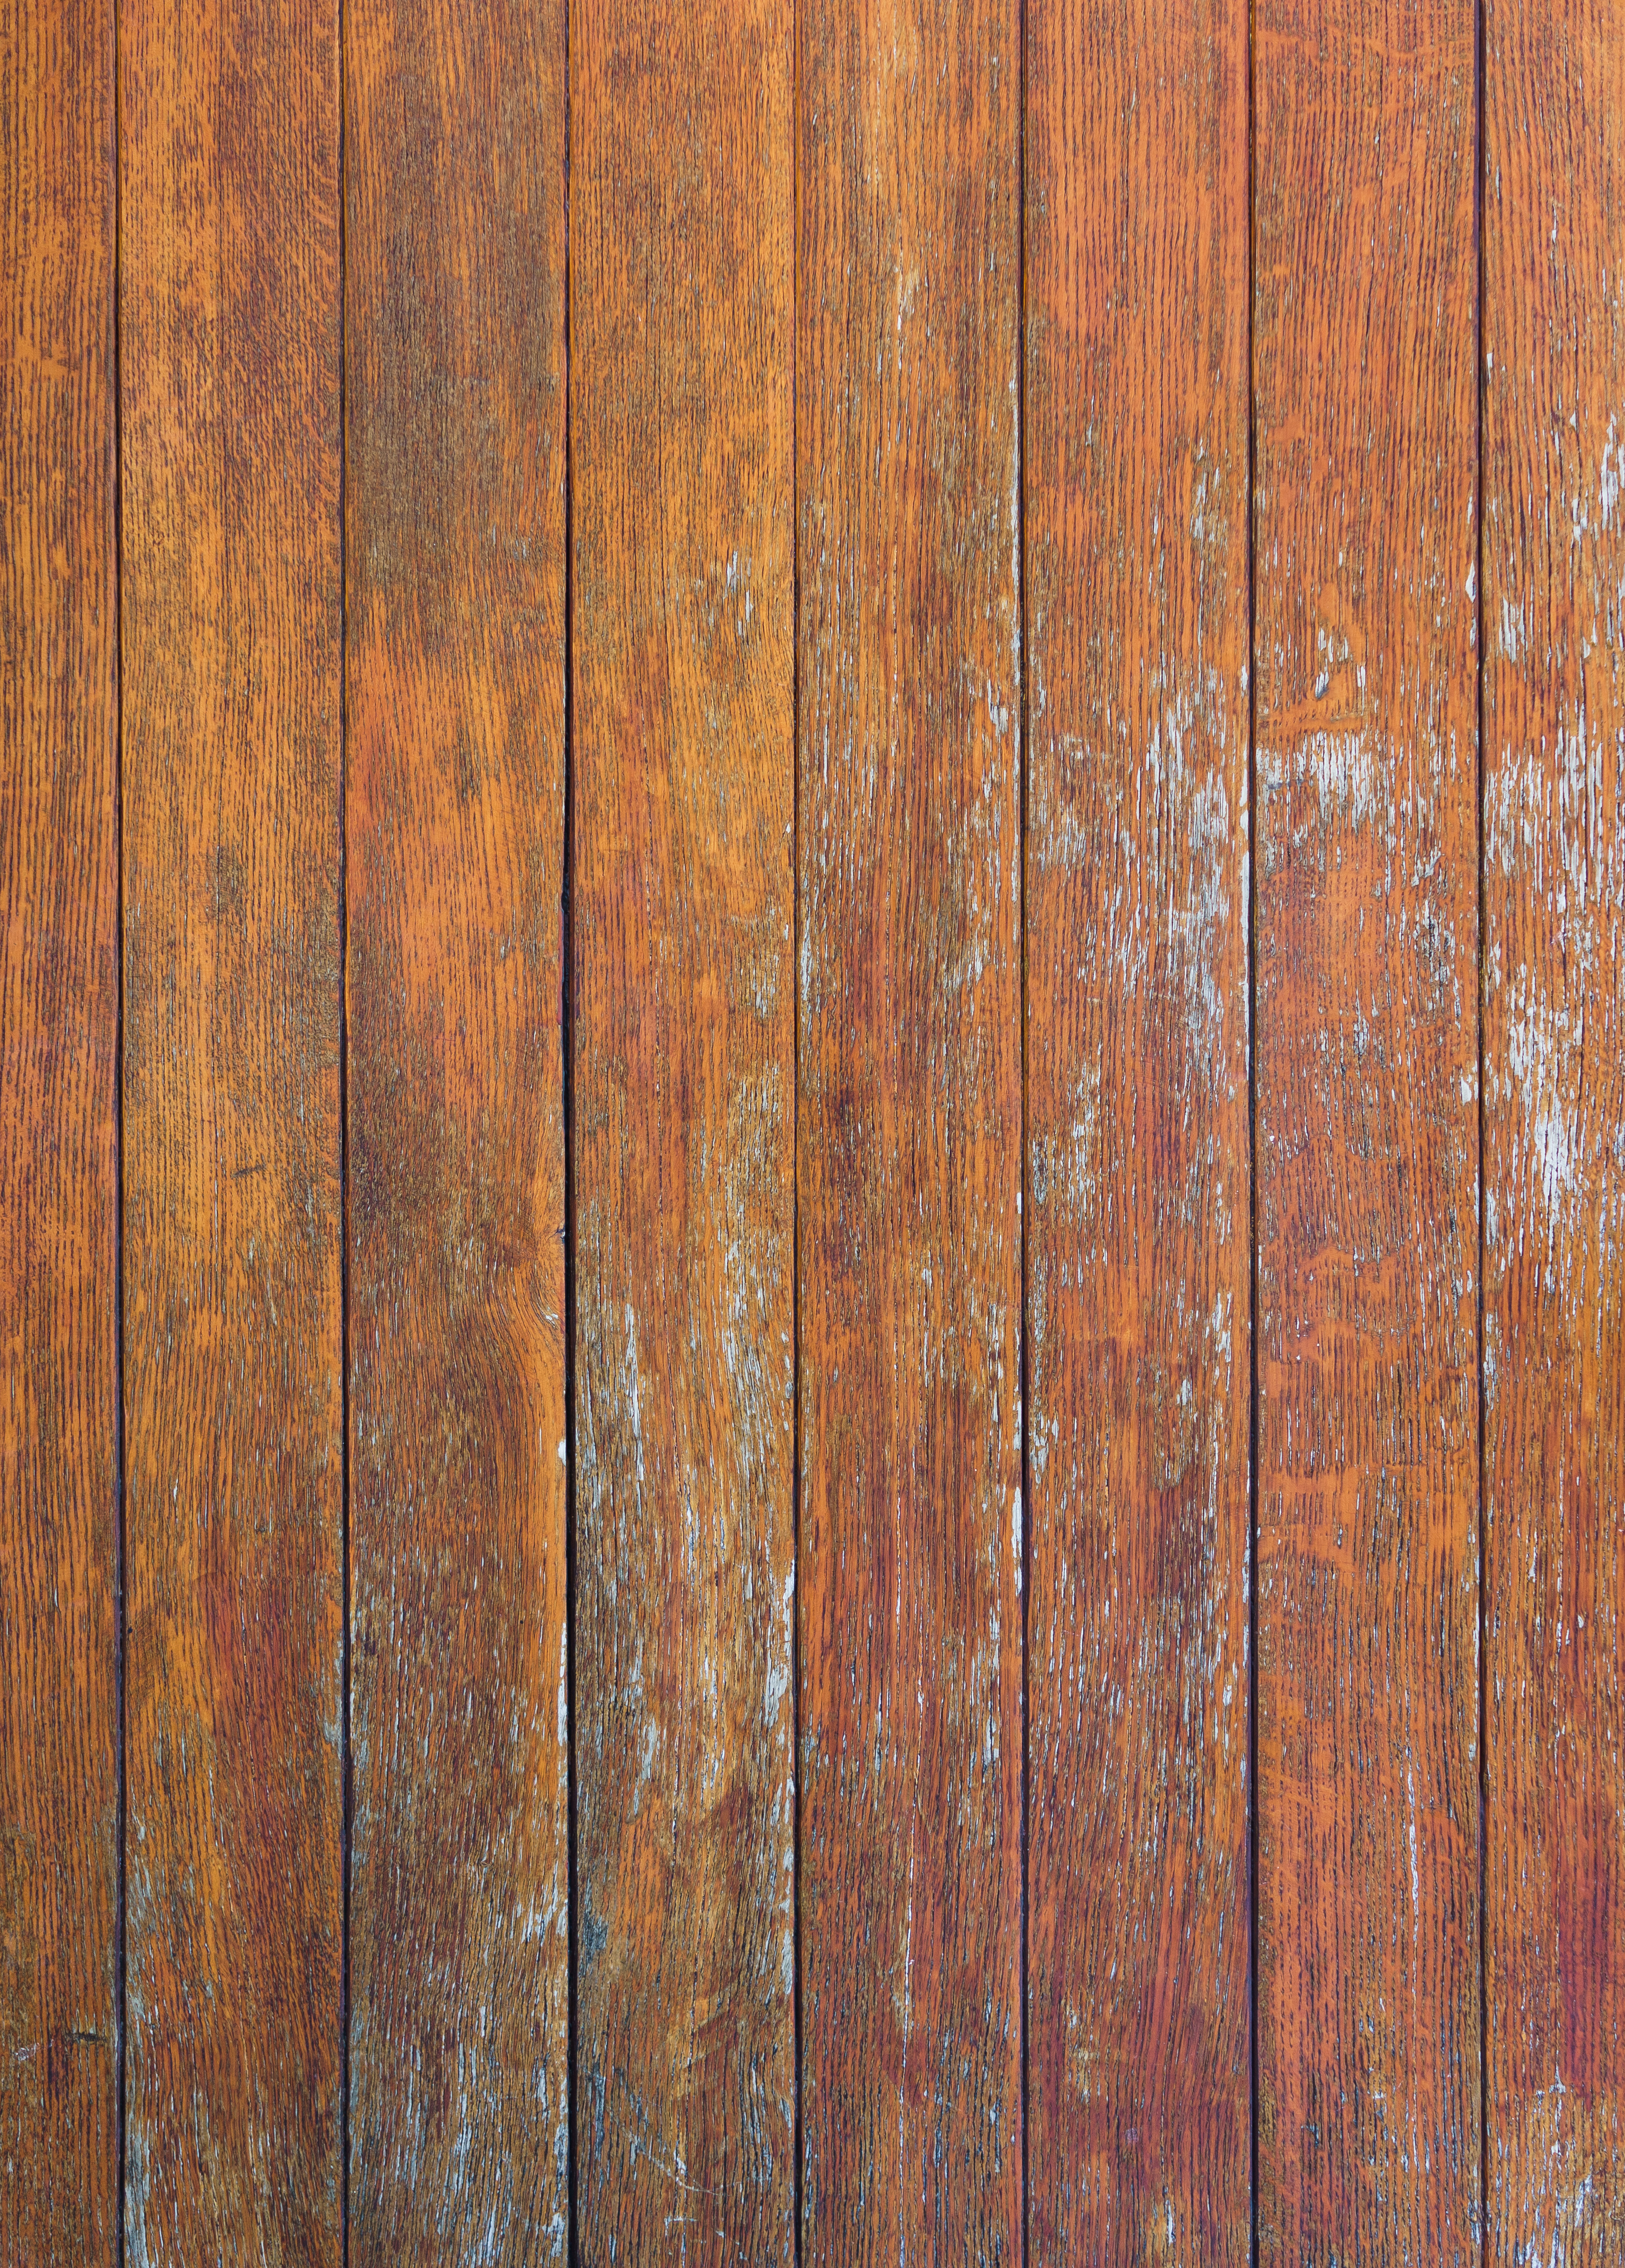 Free high resolution Wood textures | Wild Textures